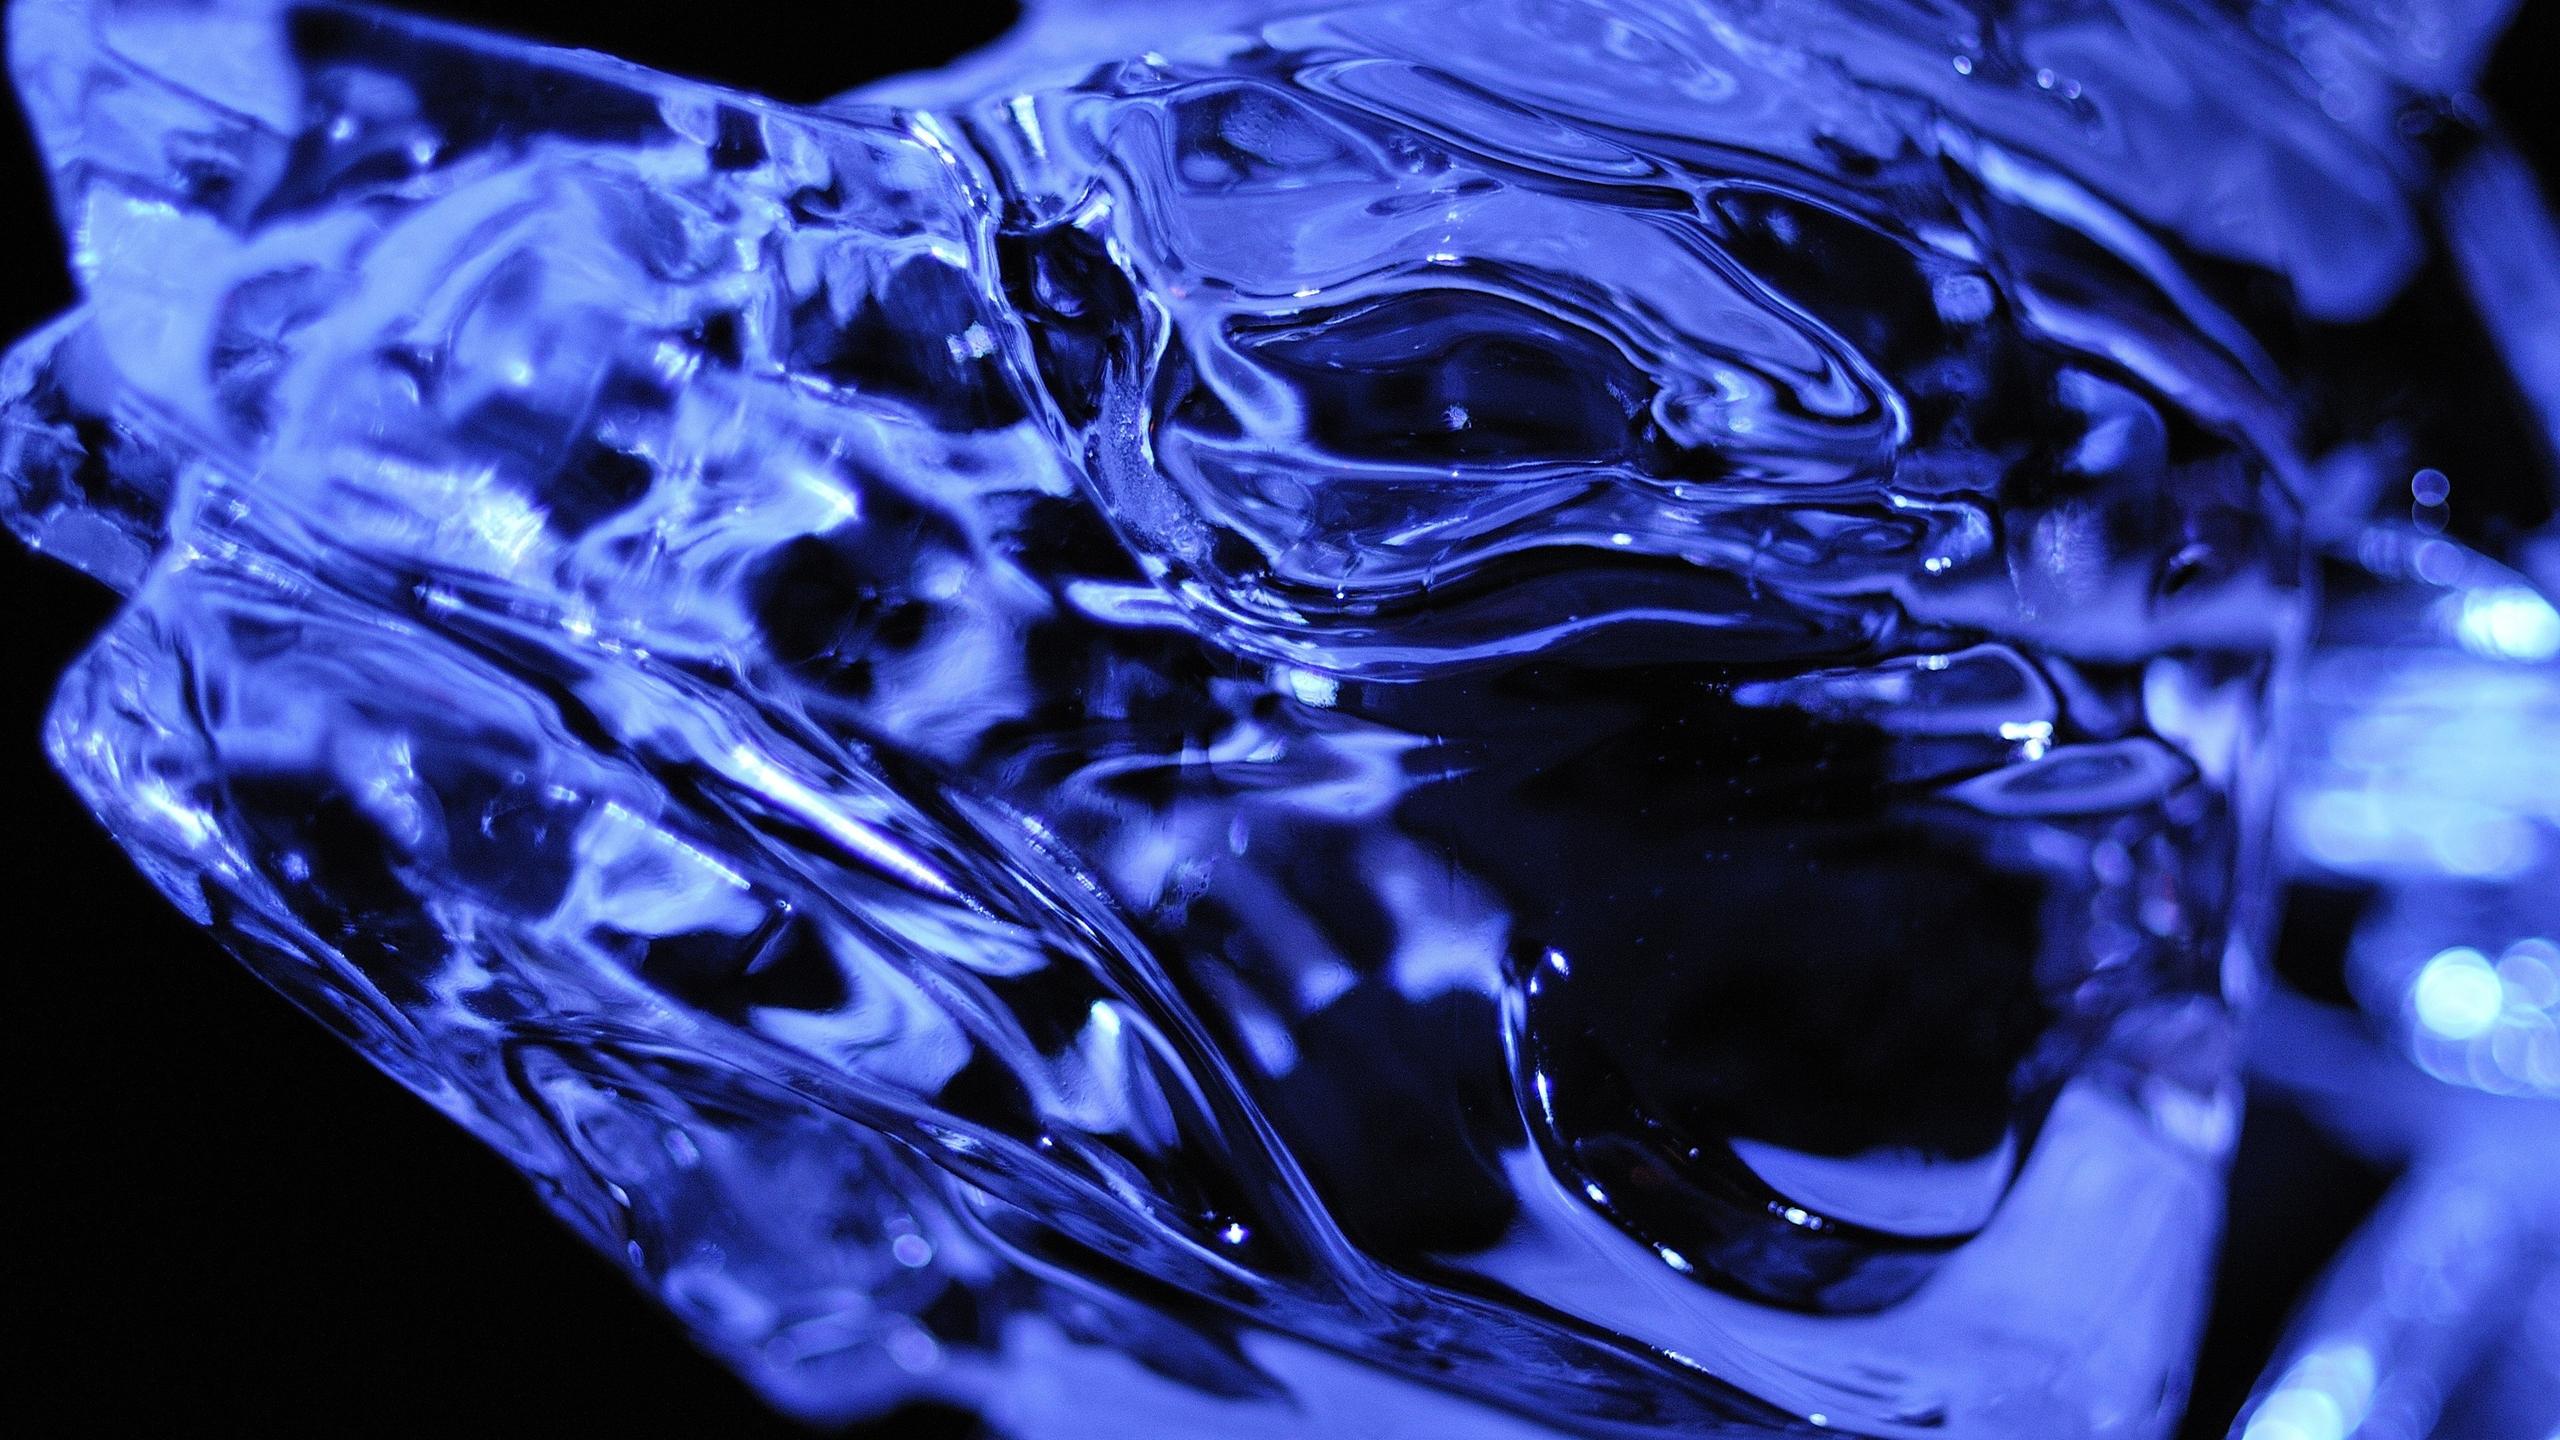 Blue abstract surge on the image